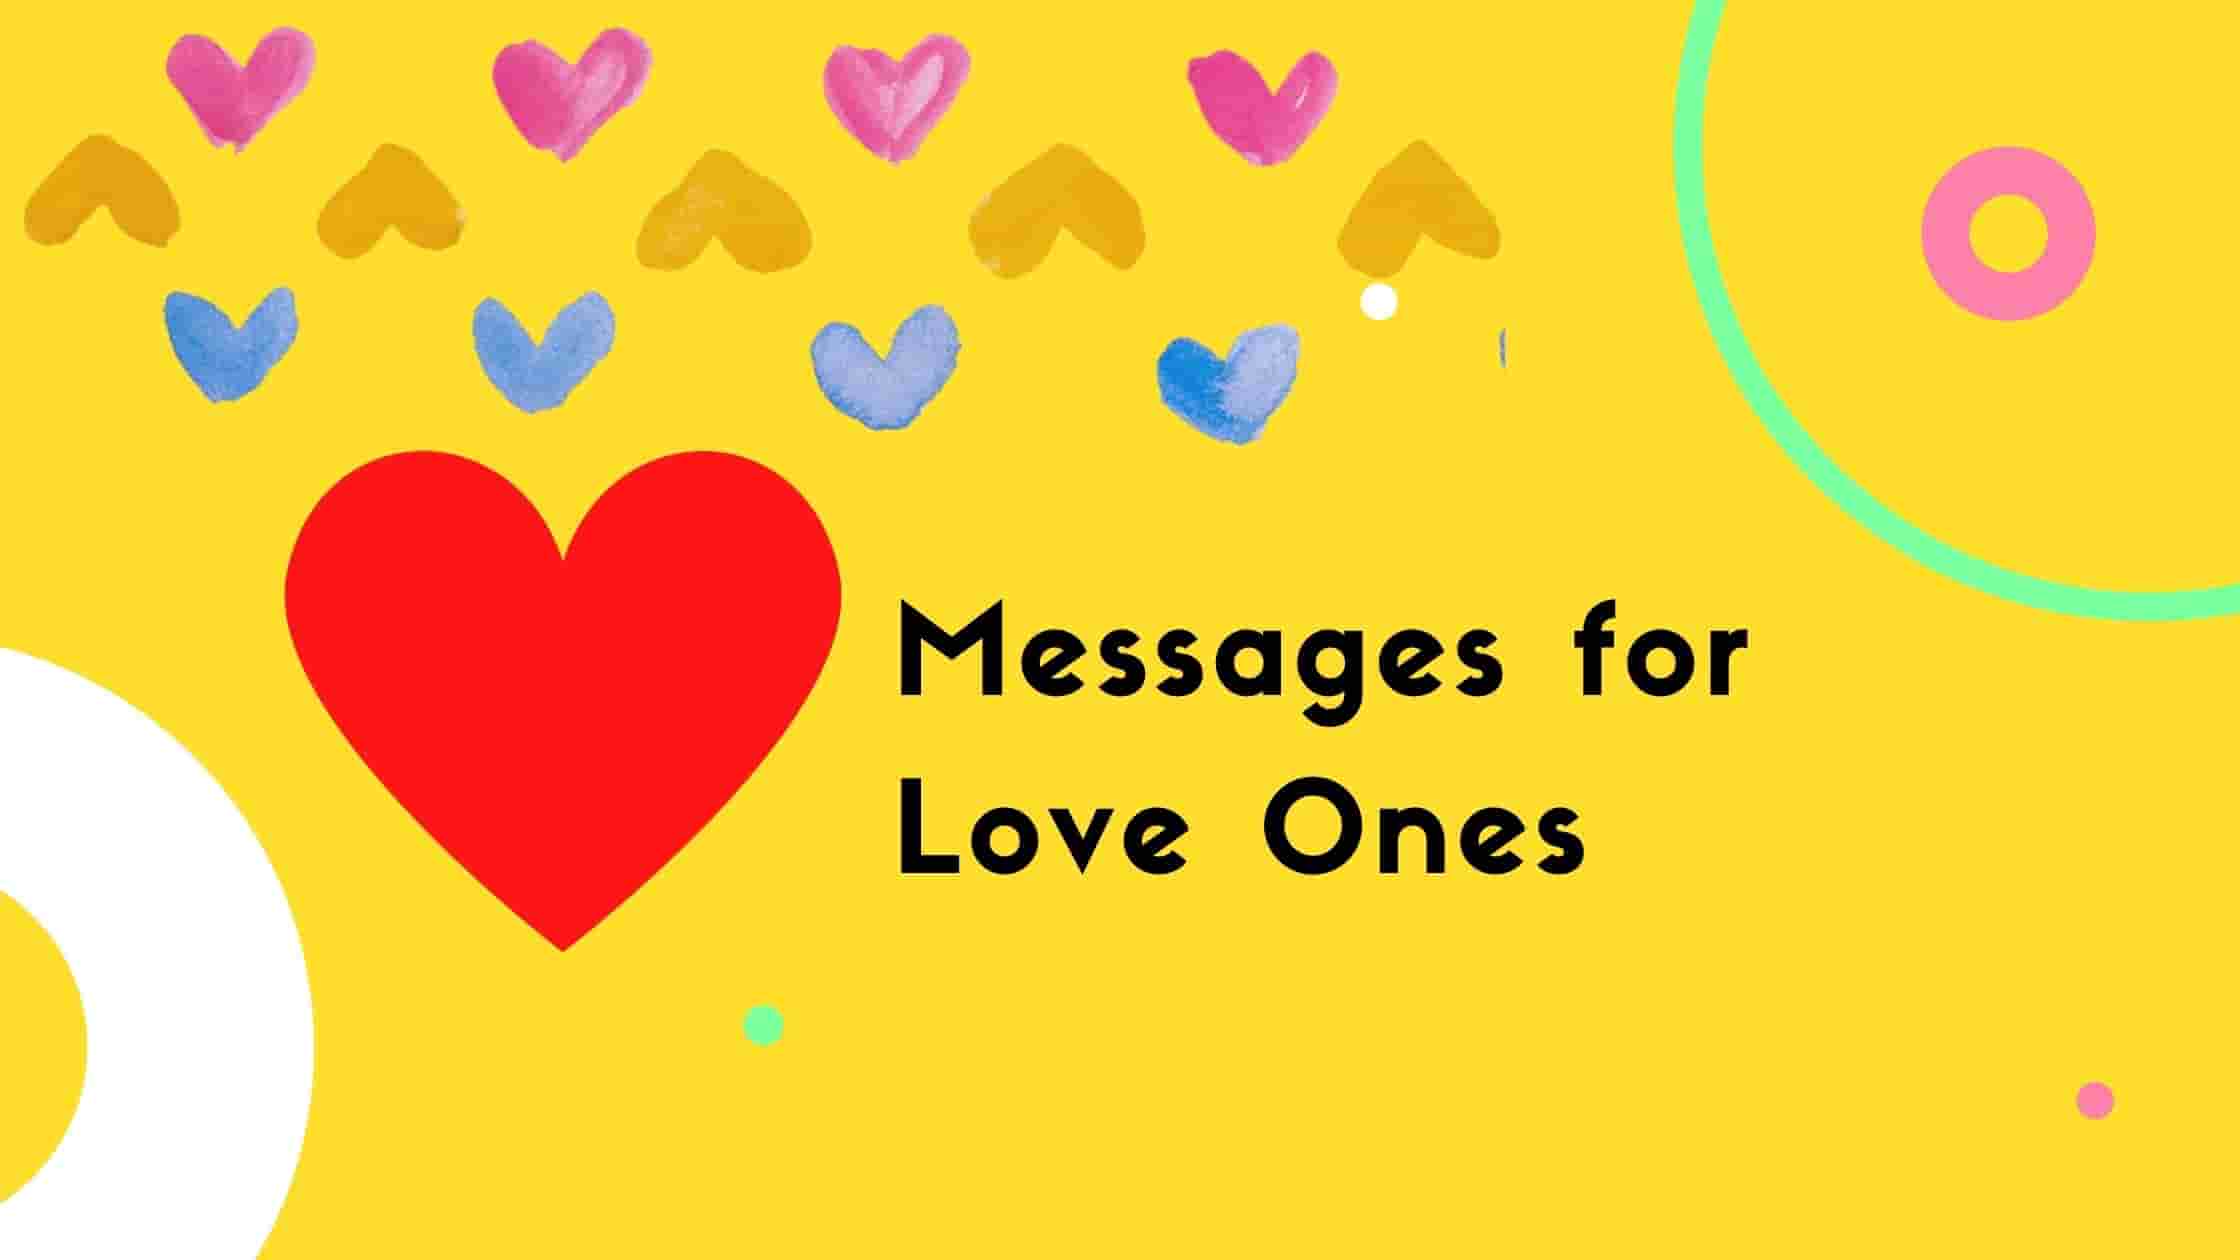 Messages for Love Ones